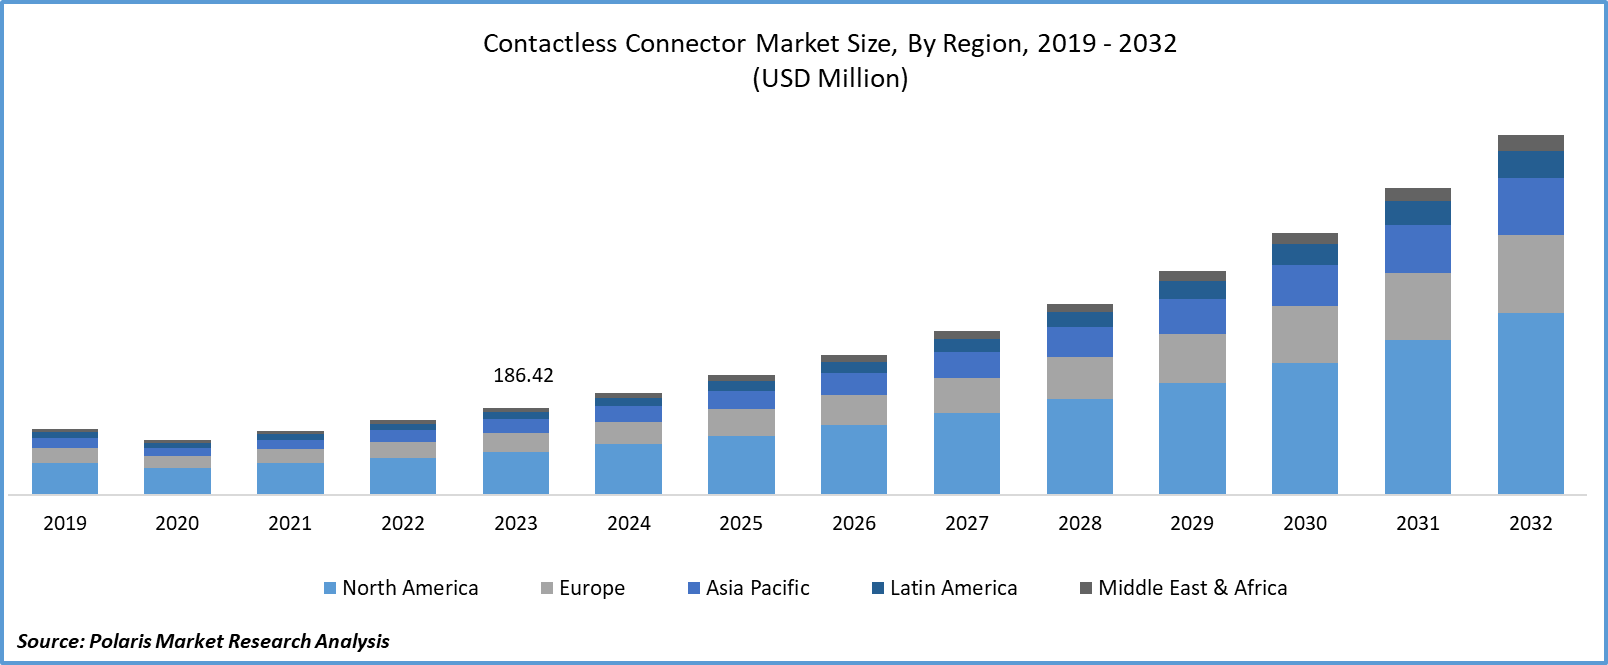 Contactless Connector Market Size